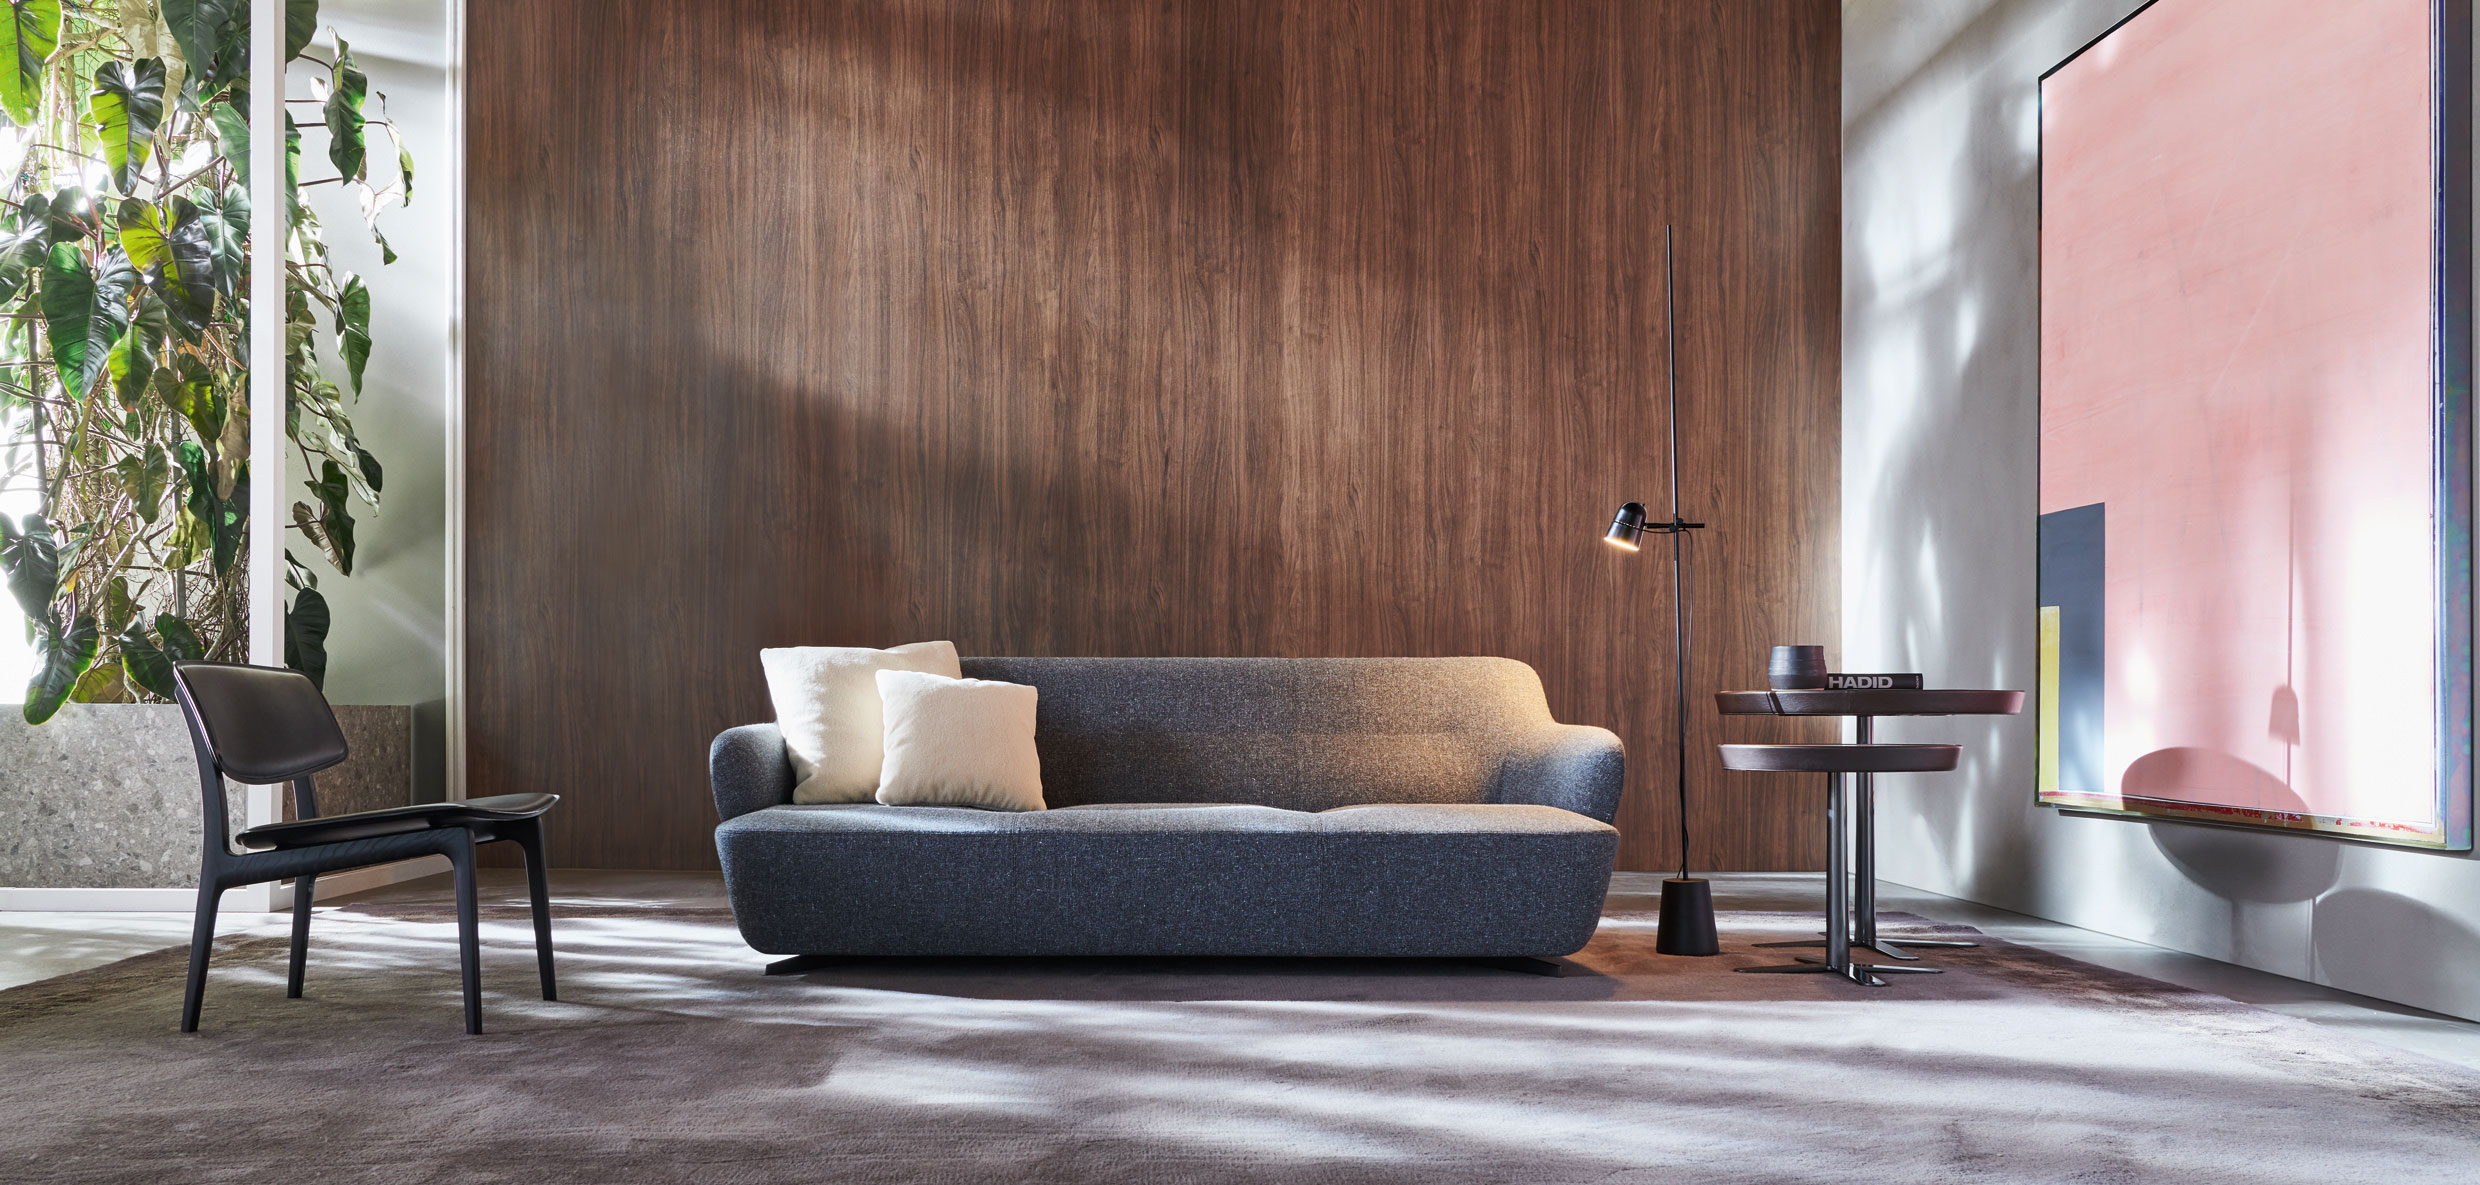 woody armchair by francesco meda for molteni&C